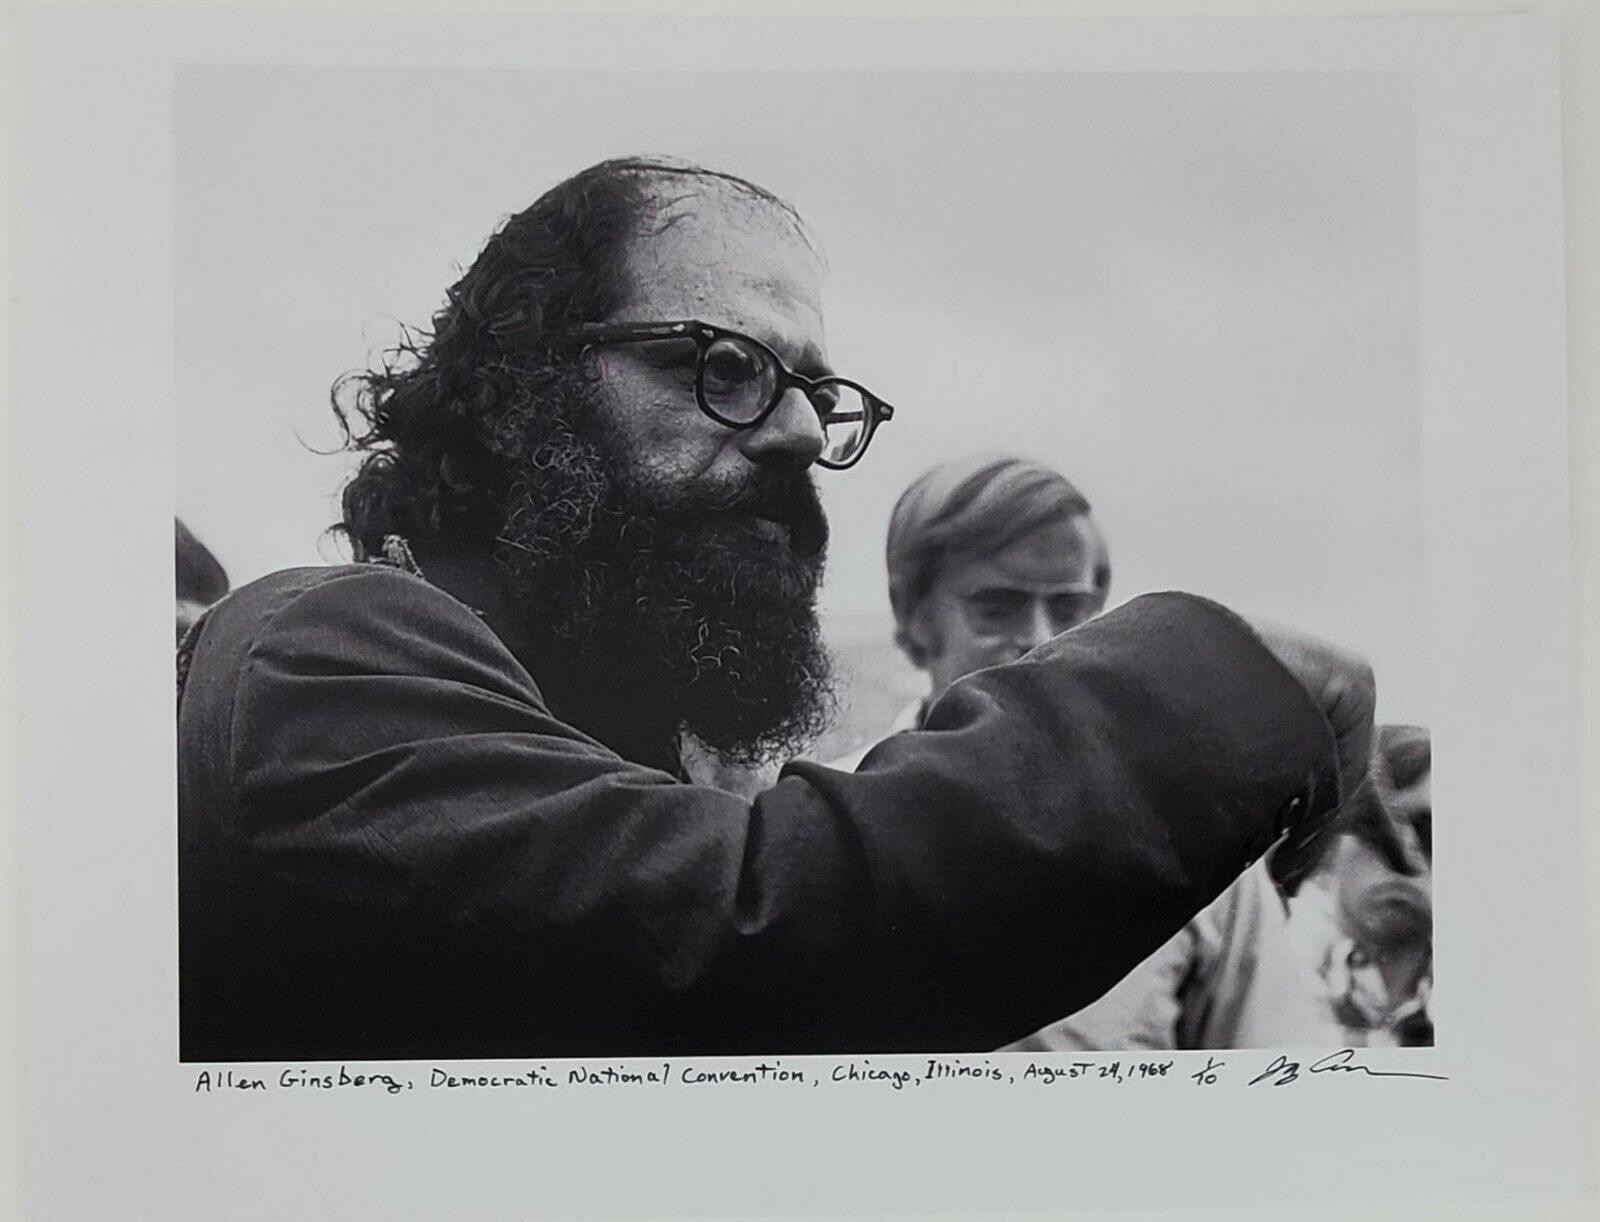 1348345 Allen Ginsberg at the Democratic National Convention in Chicago, Illinois. August 24, 1968. Jerry Aronson.